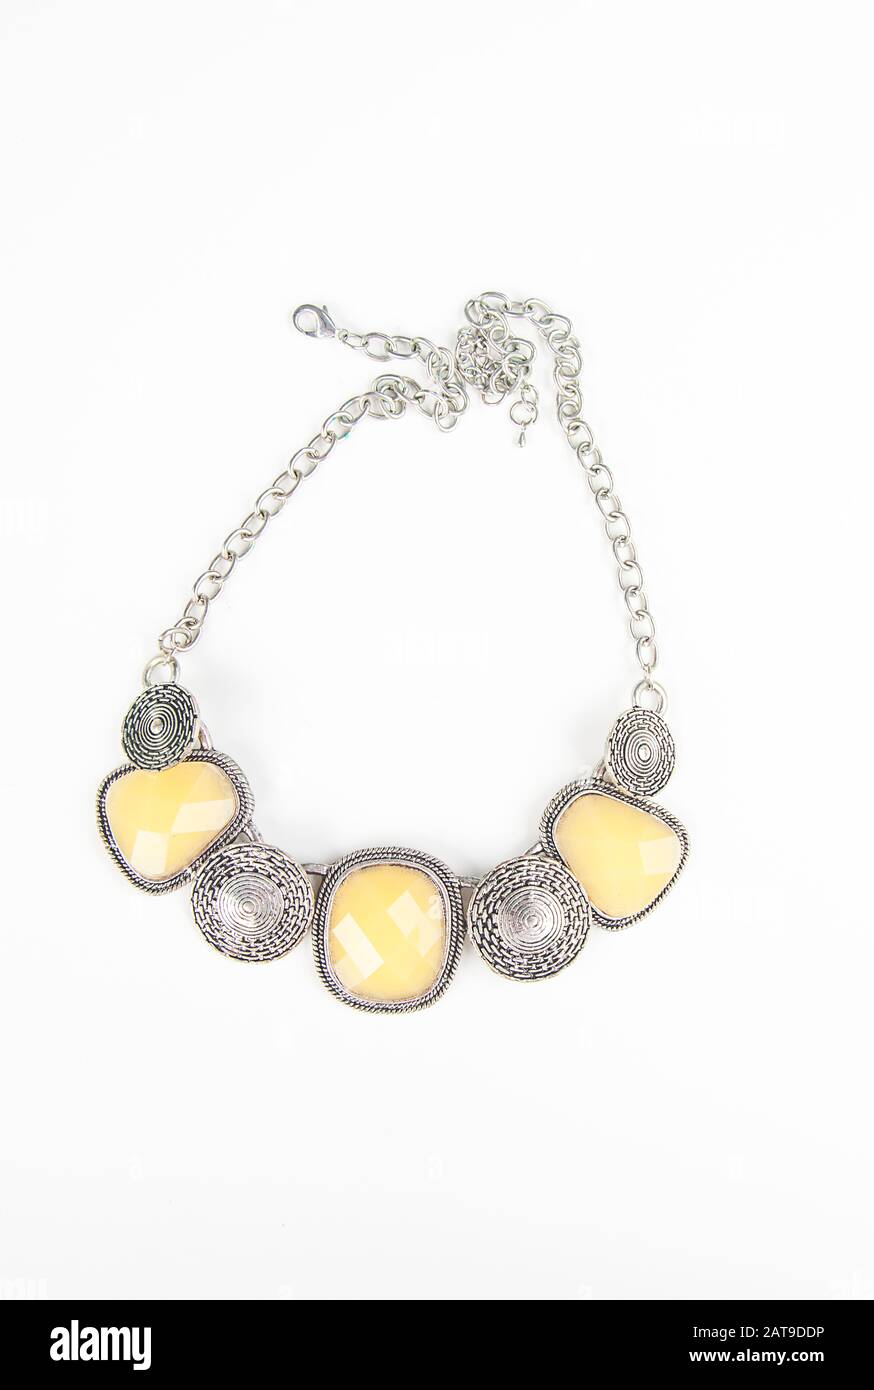 Chunky fashion statement necklace jewelry in silver and light yellow on a chain.  Fashion accessory is isolated on a light background. Stock Photo